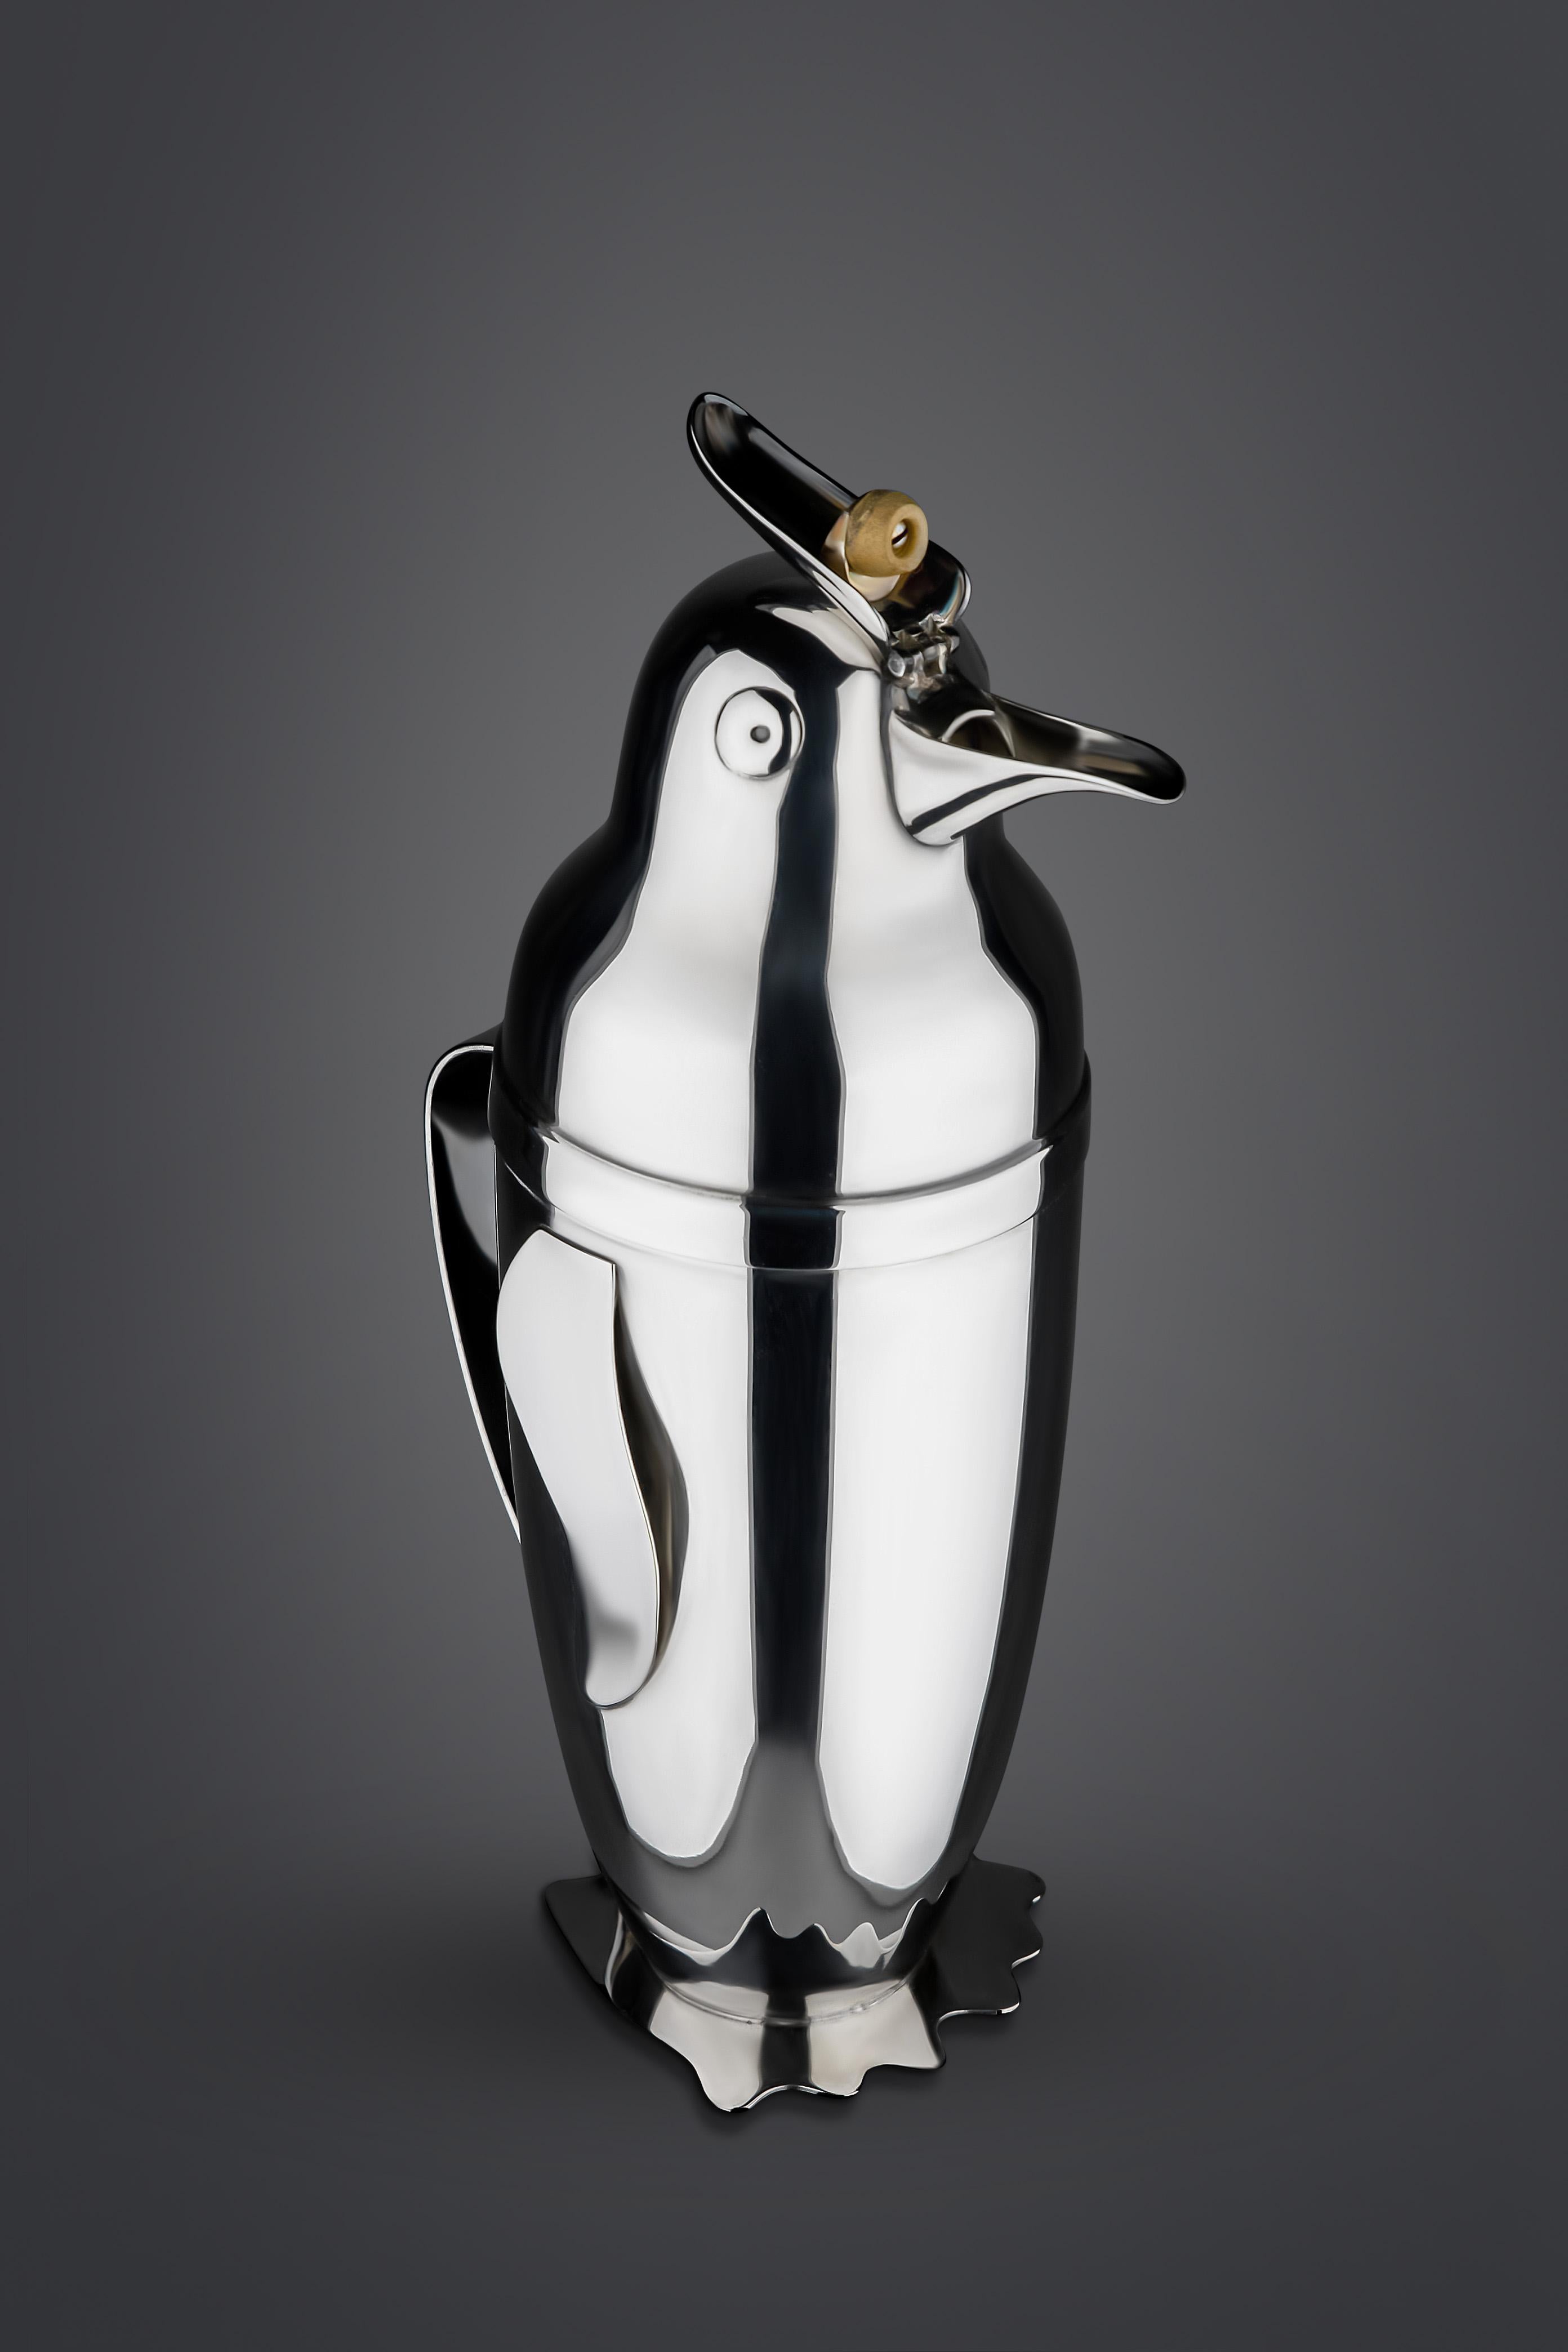 Indulge in the timeless elegance and whimsical charm of the iconic Art Deco Napier silver-plated penguin cocktail shaker, designed by the master craftsman Emile Schulke in 1936. This original Emile Schulke penguin is not just a cocktail shaker; it's